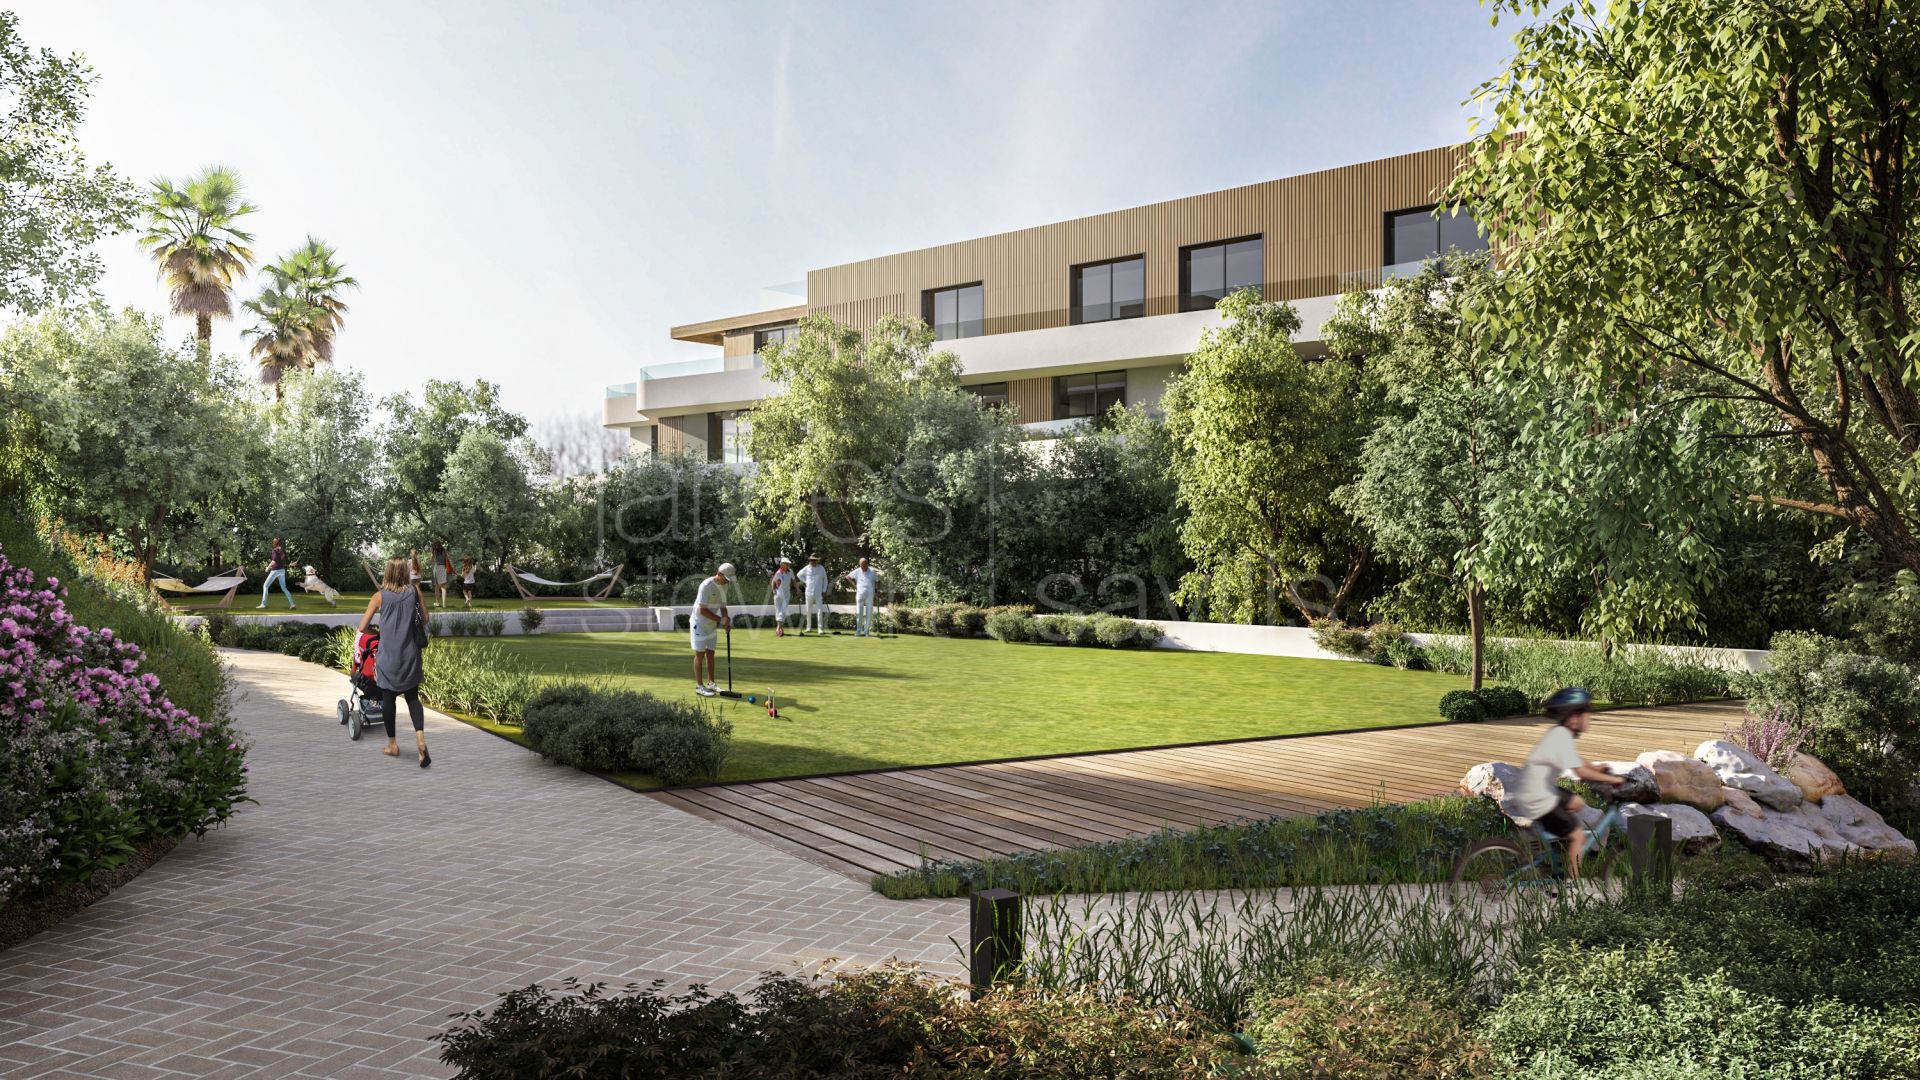 VILLAGE VERDE now for sale - the exciting new residential community in Sotogrande delivery June 2023